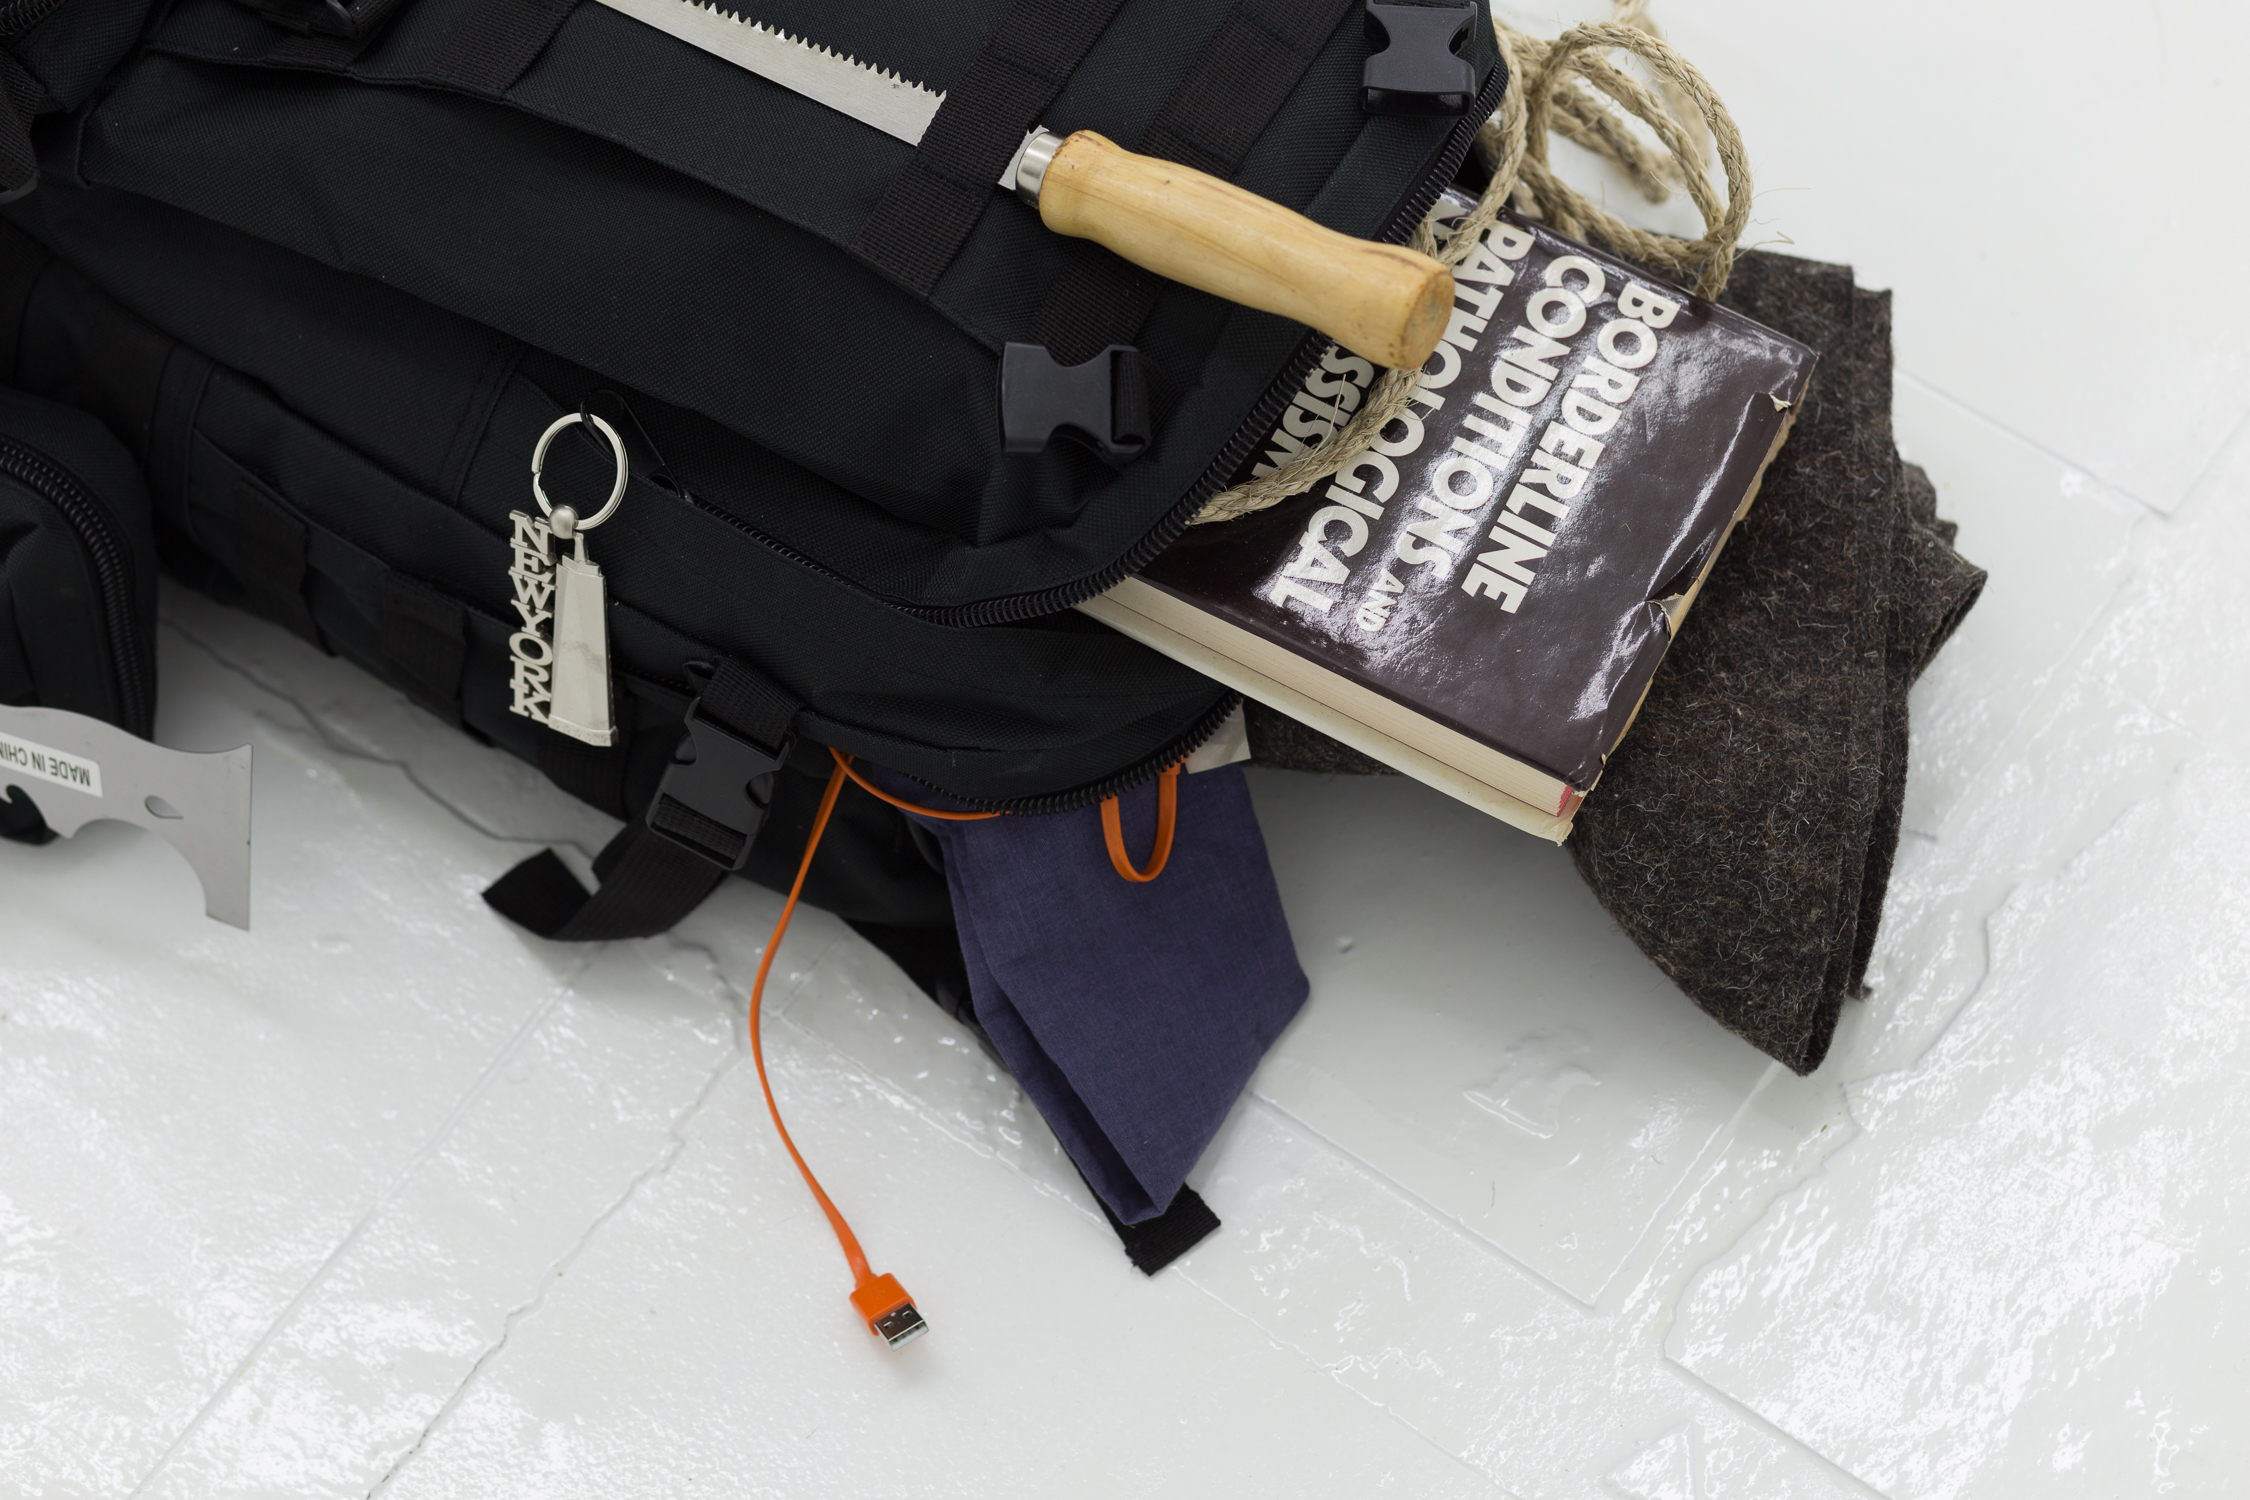  Some items stick out of the backpack, which has a New York keychain on its zipper. A book, a drywall knife, a usb cable, and a piece of felt